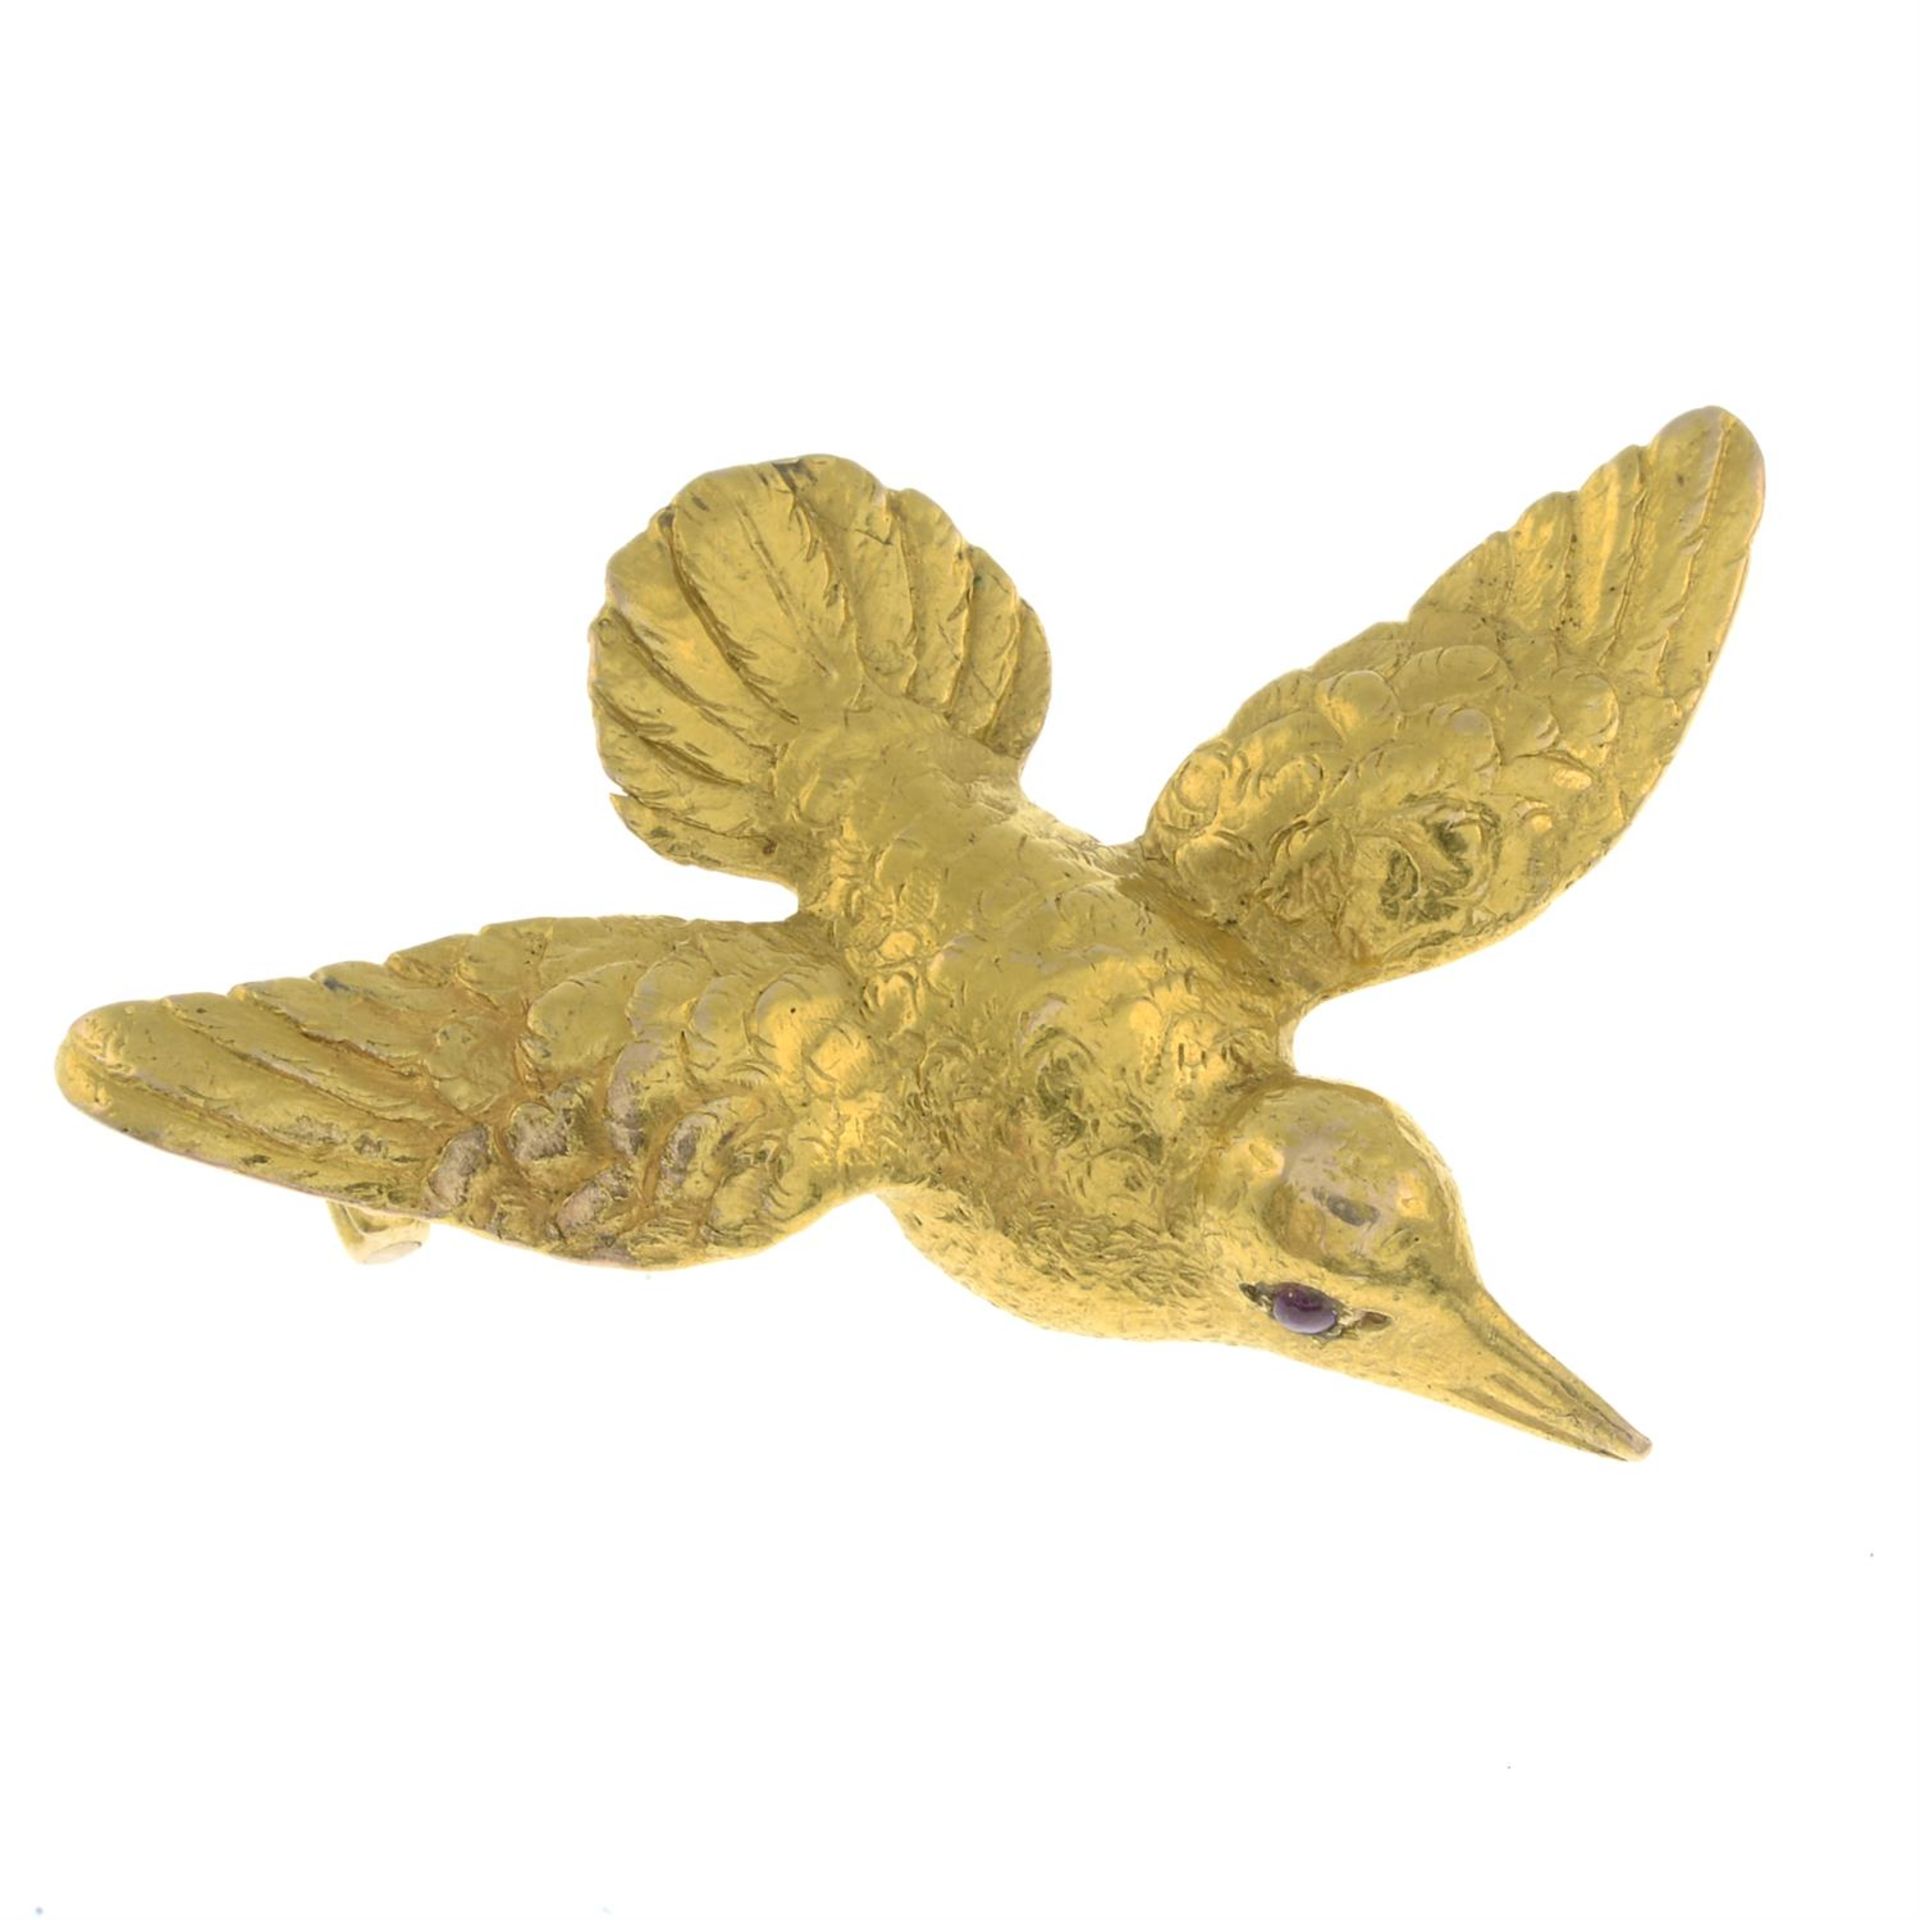 An early 20th century gold bird brooch, possibly a hummingbird, with ruby eyes. - Image 2 of 4